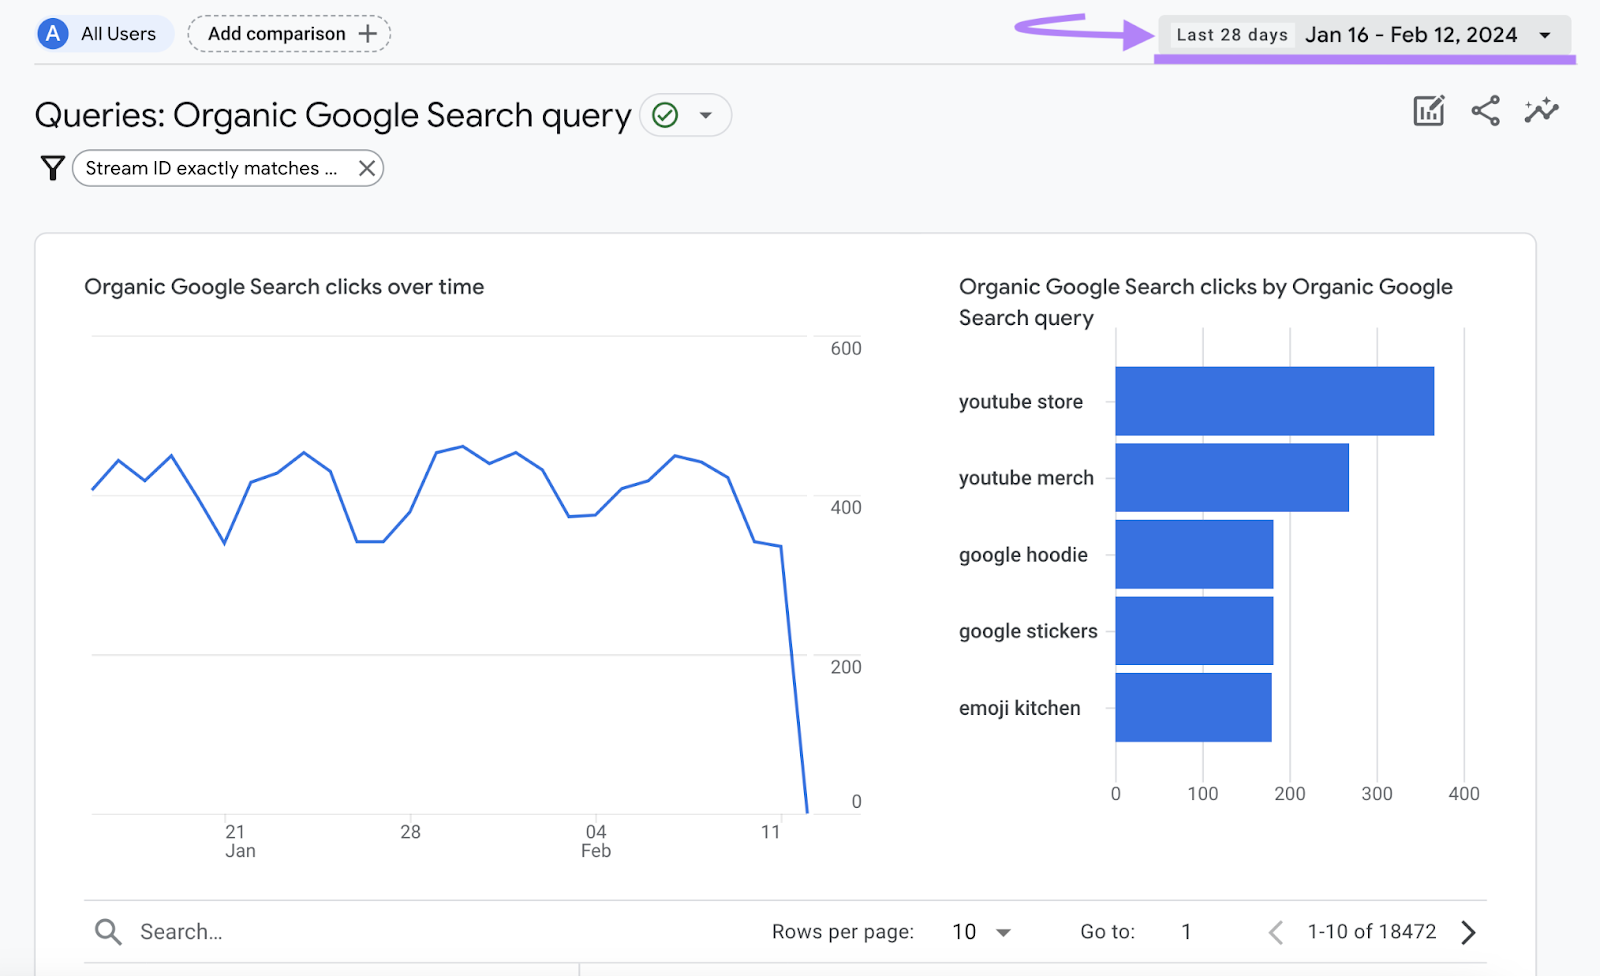 The **** range selector highlighted in the upper right corner of Queries: Organic Google Search query report